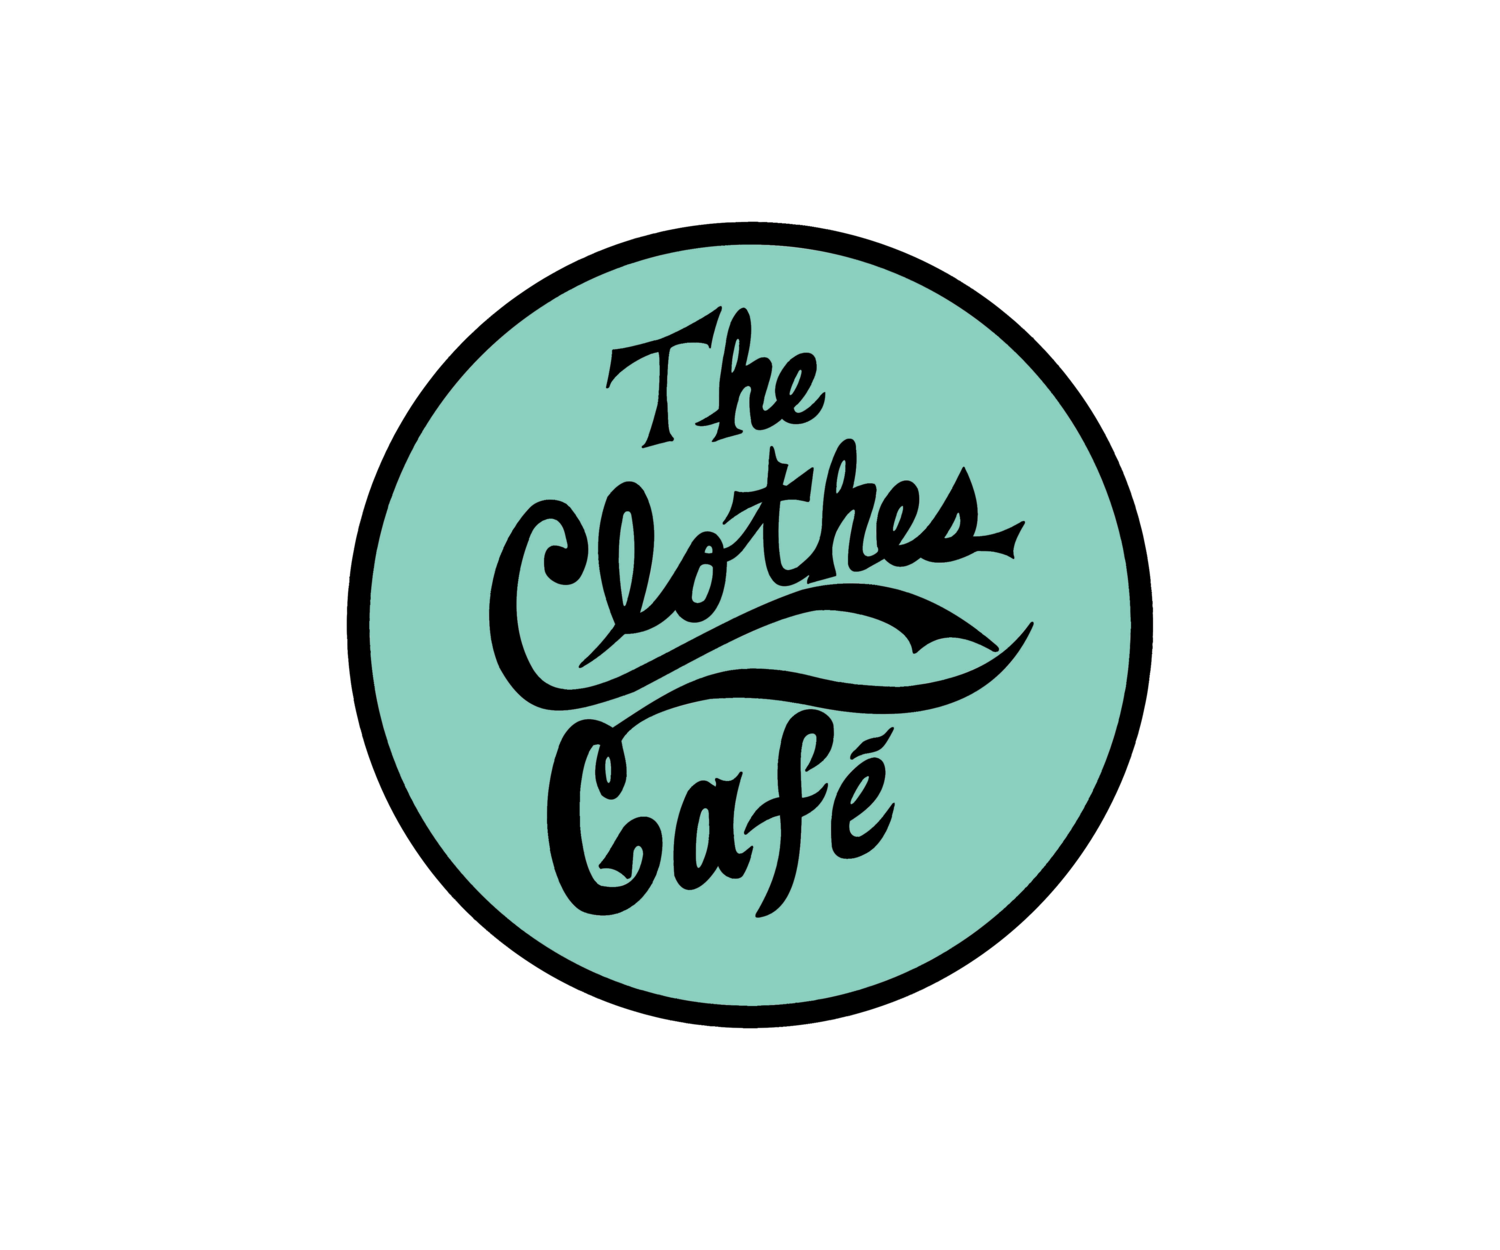 The Clothes Cafe